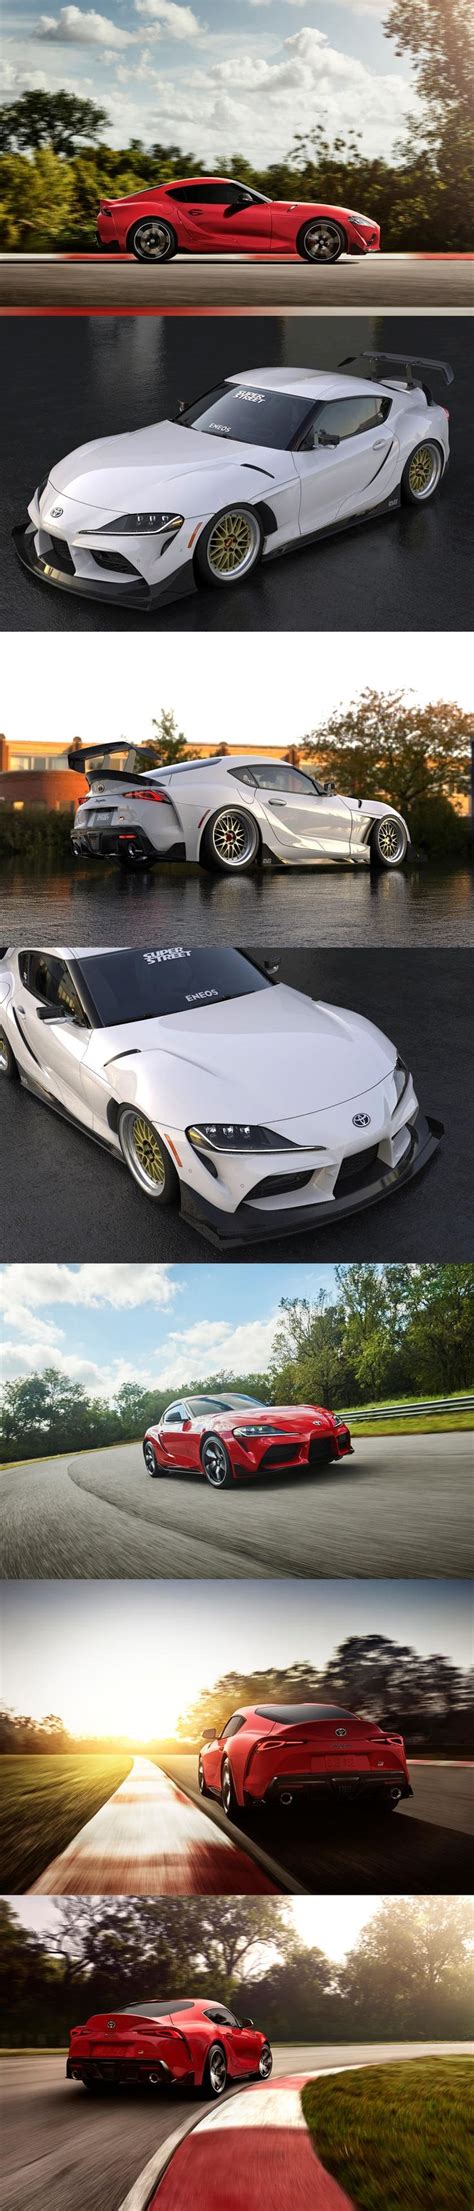 2020 Toyota Gr Supra Tries On A Wild Widebody Kit No Doubt There Will